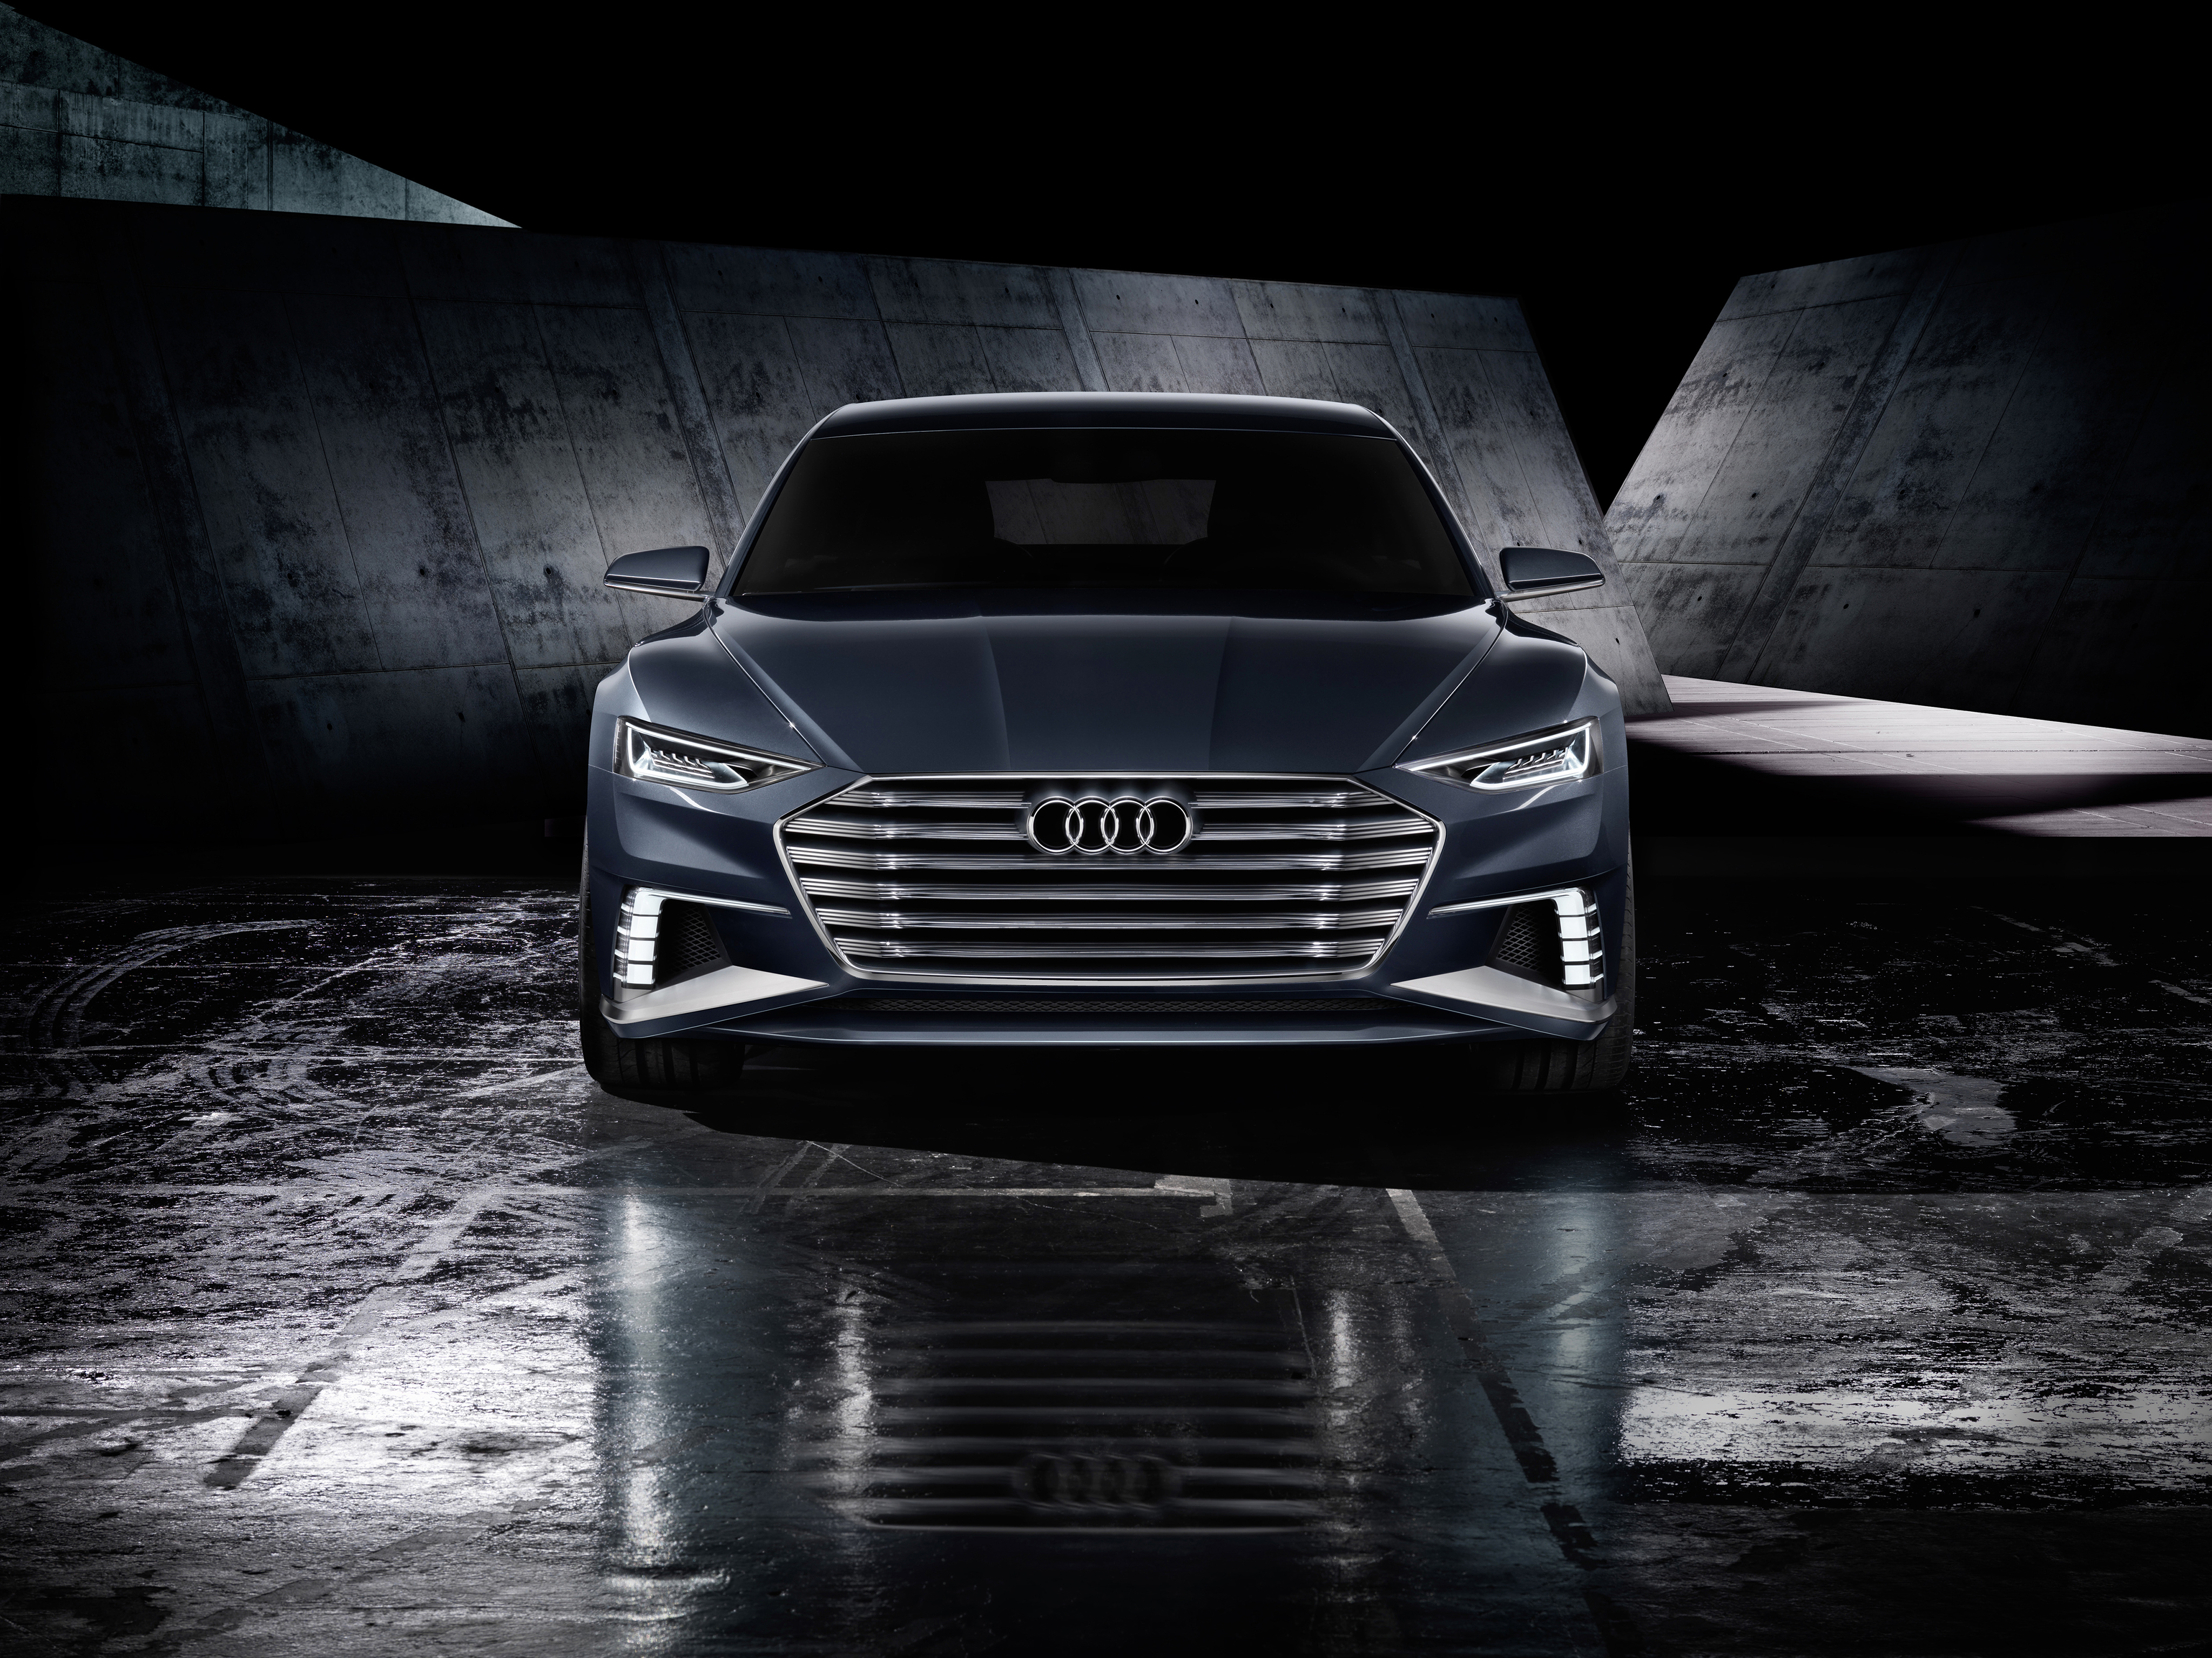 158155 download wallpaper audi, cars, front view, concept, 2015, avant, prologue screensavers and pictures for free